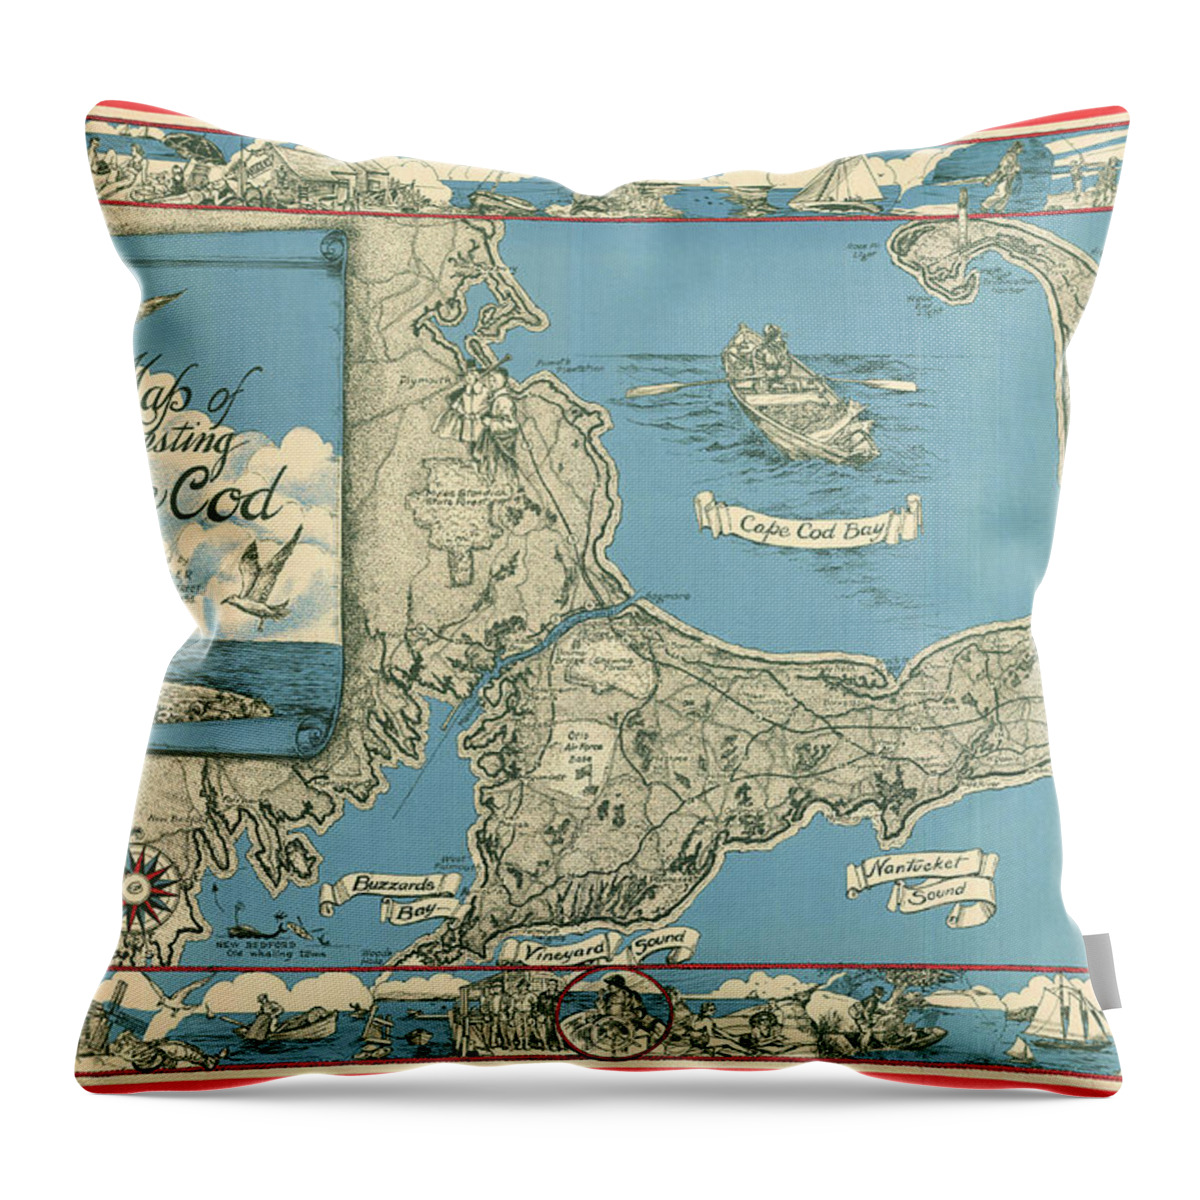 Antique Map Of Cape Cod Throw Pillow featuring the drawing Antique Maps - Old Cartographic maps - Antique Map of Cape Cod, Massachusetts, 1945 by Studio Grafiikka